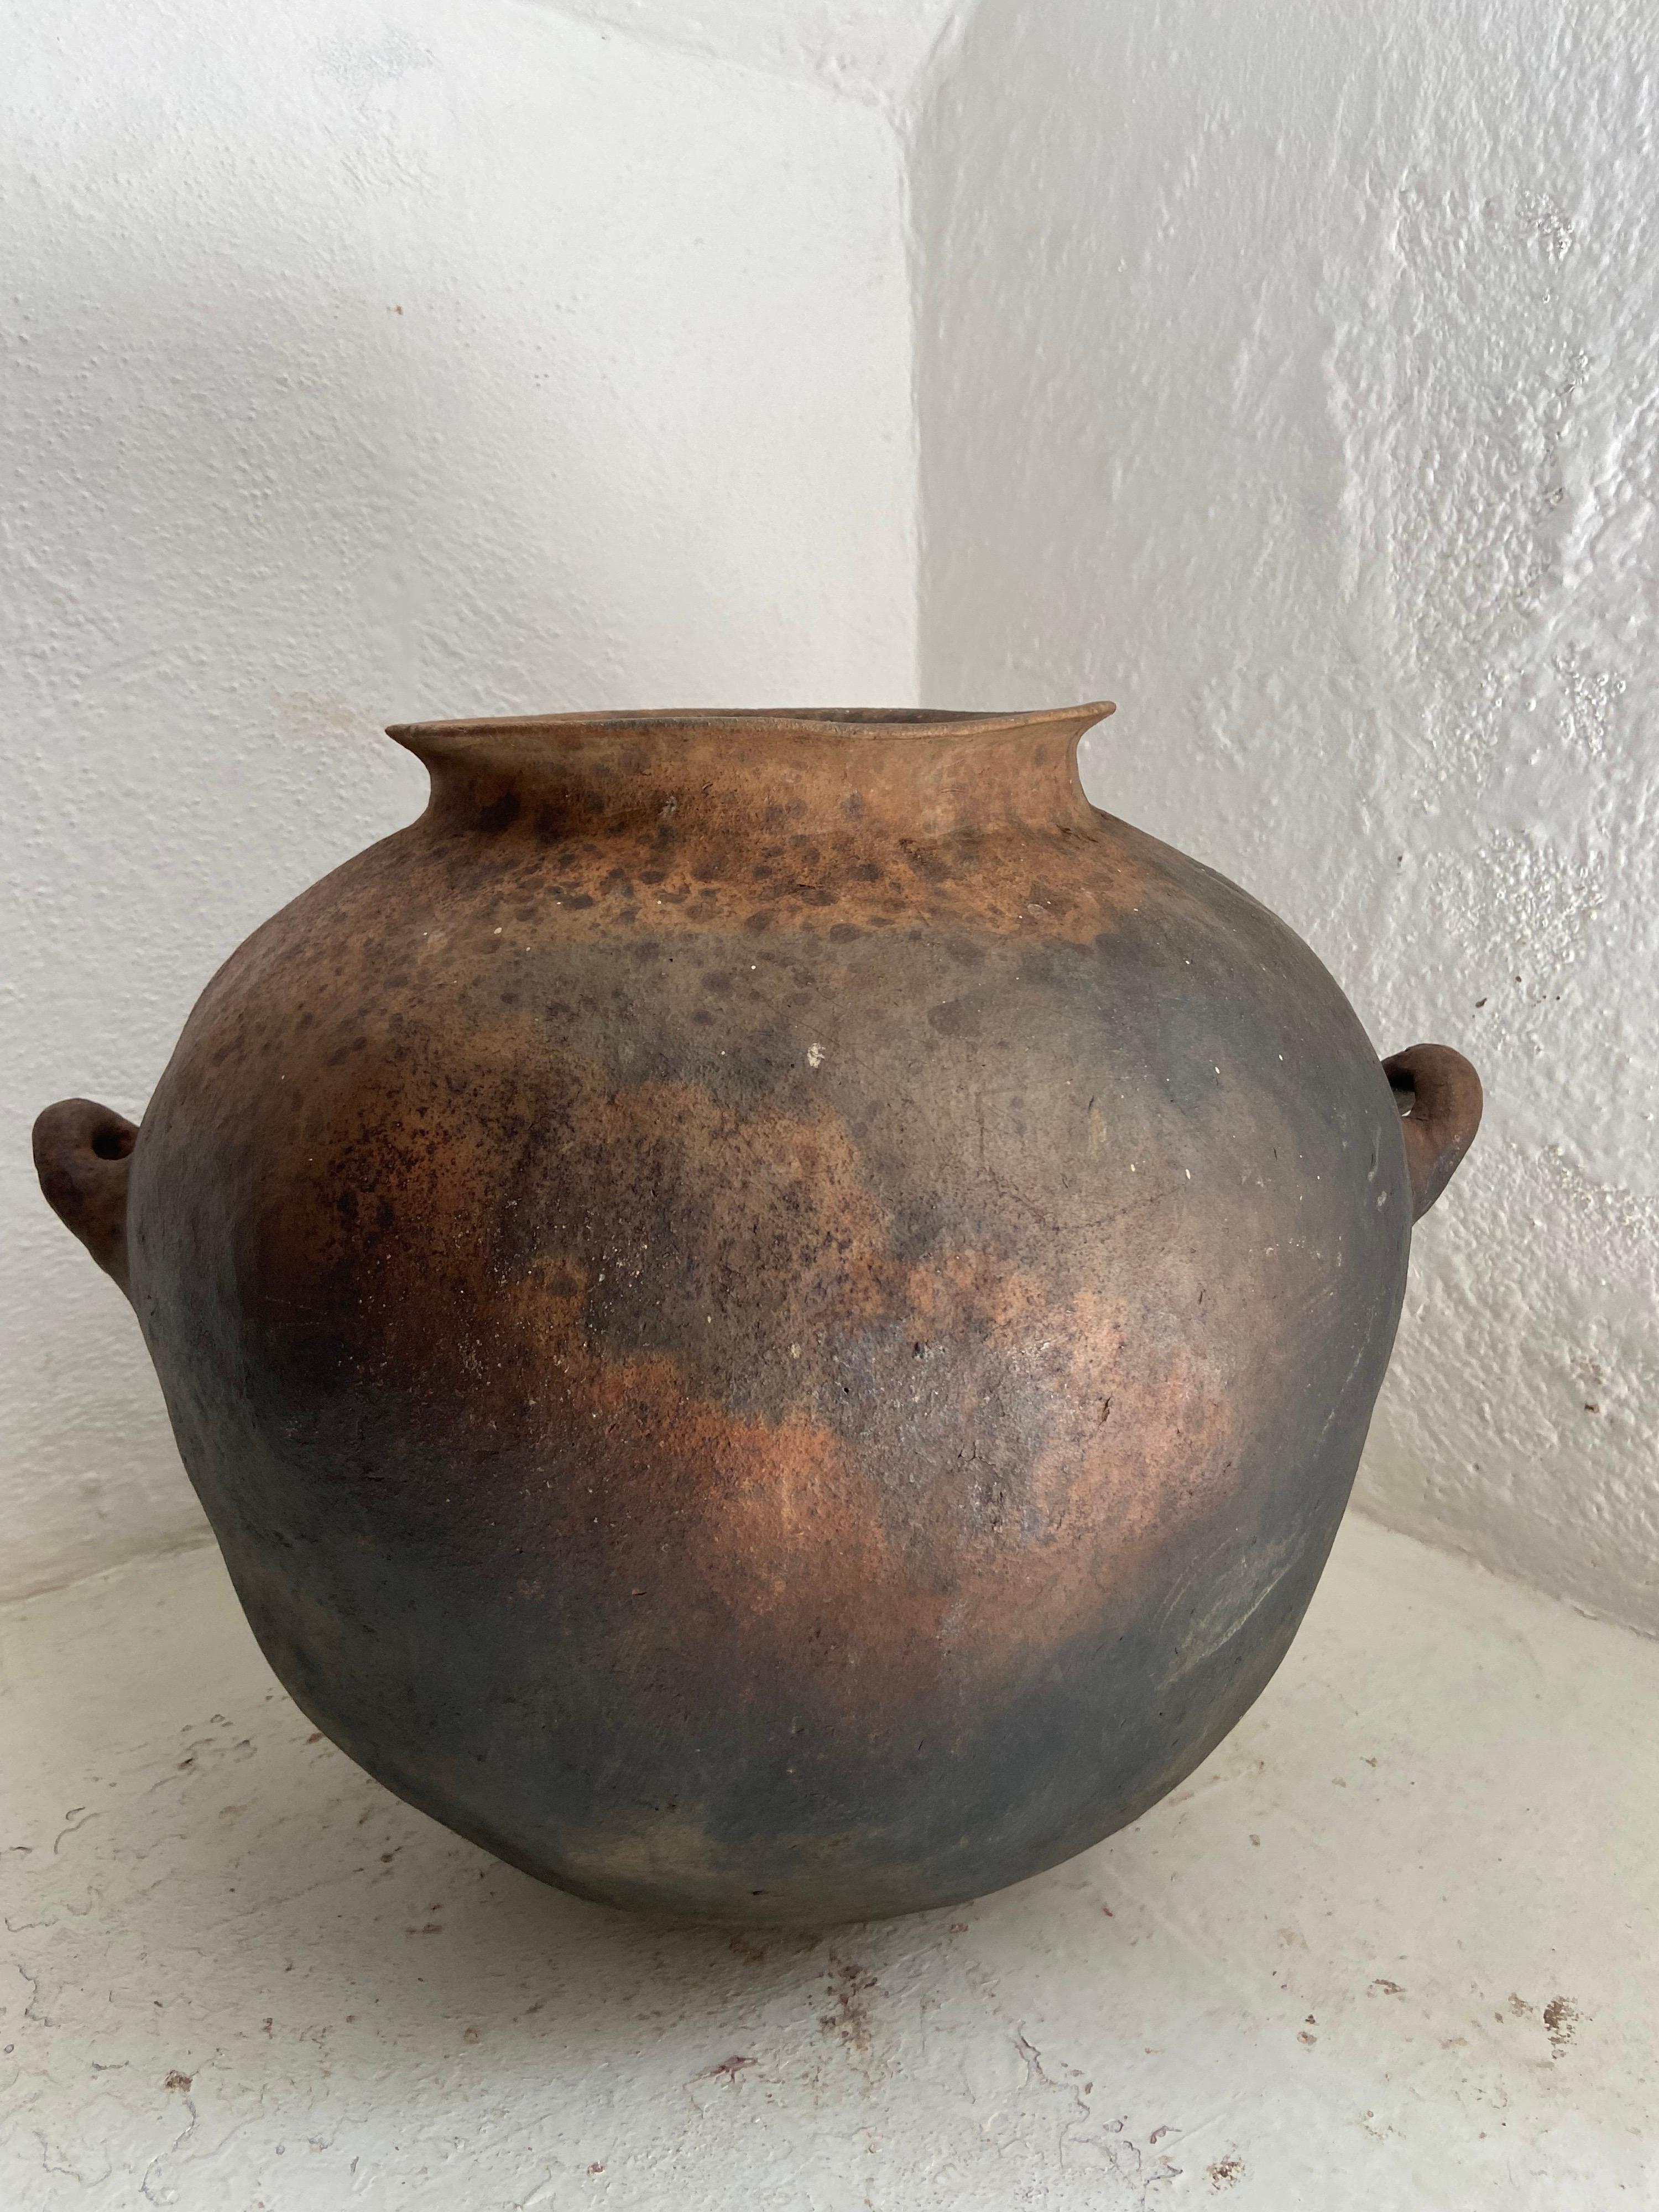 Early 20th century water jar from Northern Puebla, Mexico. From the Nahua indigenous communities of the northern territory bordering the state of Veracruz. This style of pottery was discontinued with the introduction of plastics in the sixties and